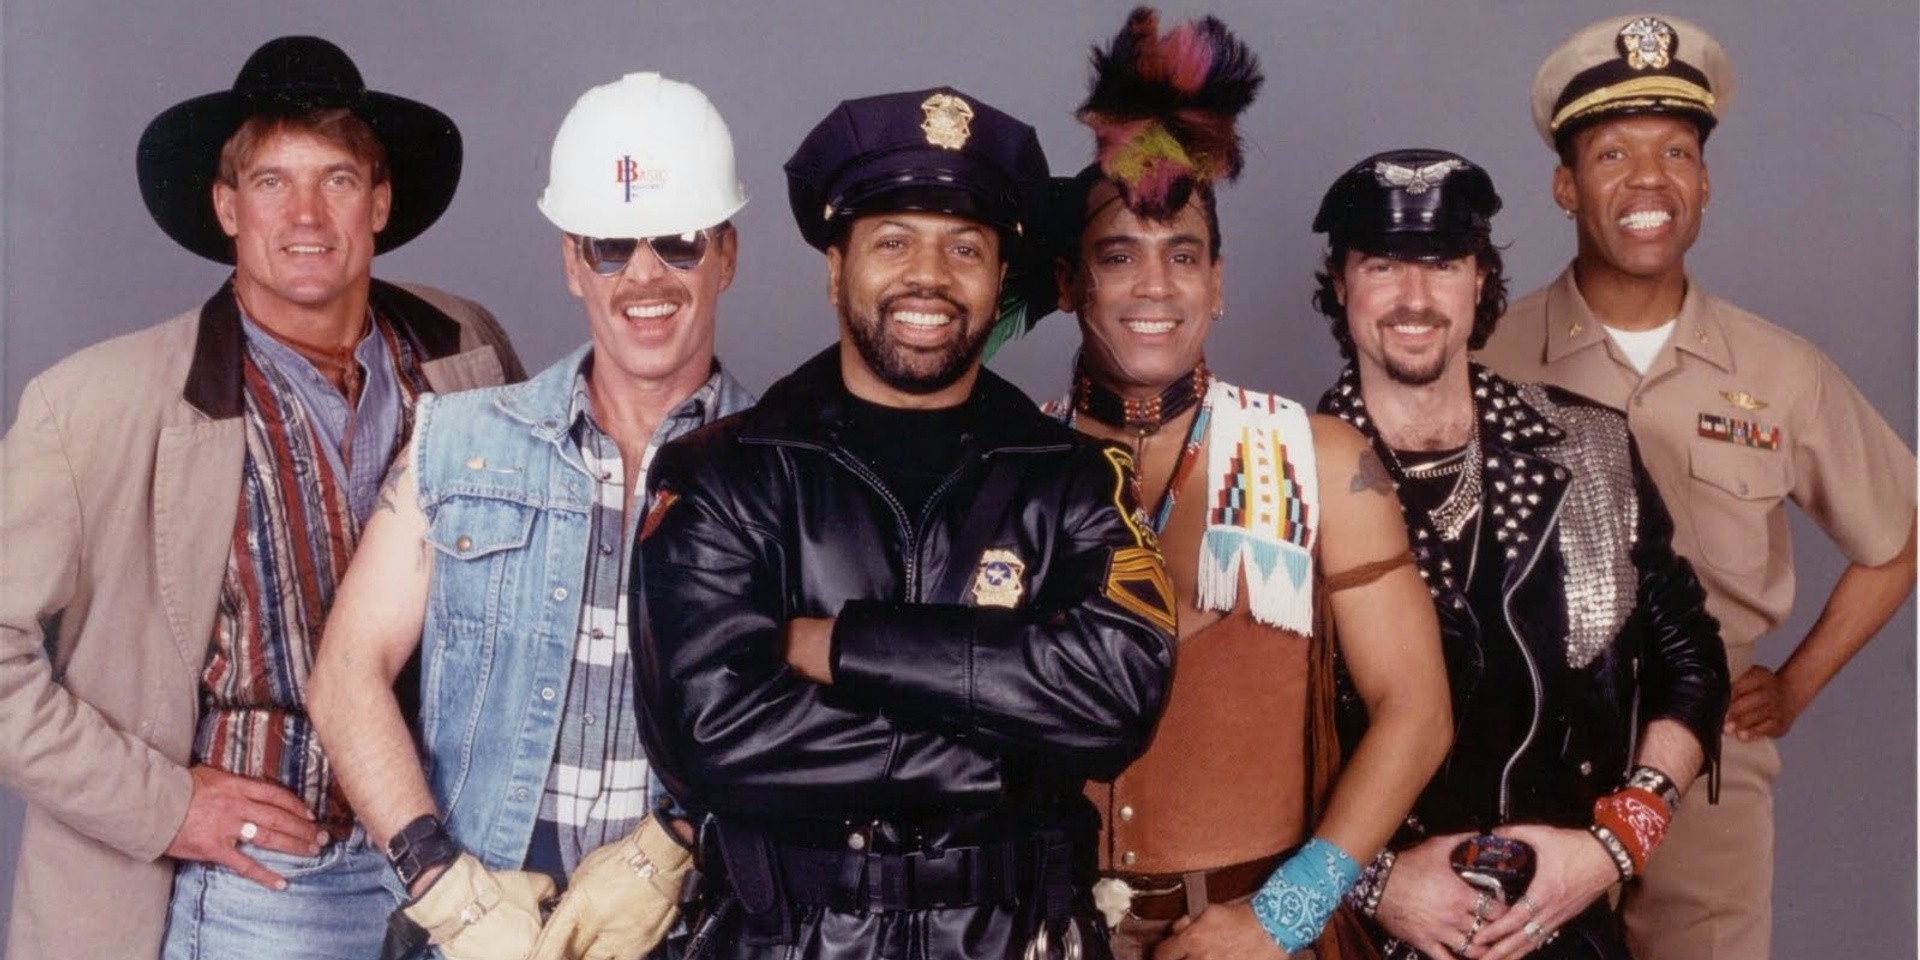 Village People celebrate their 40th Anniversary in Singapore